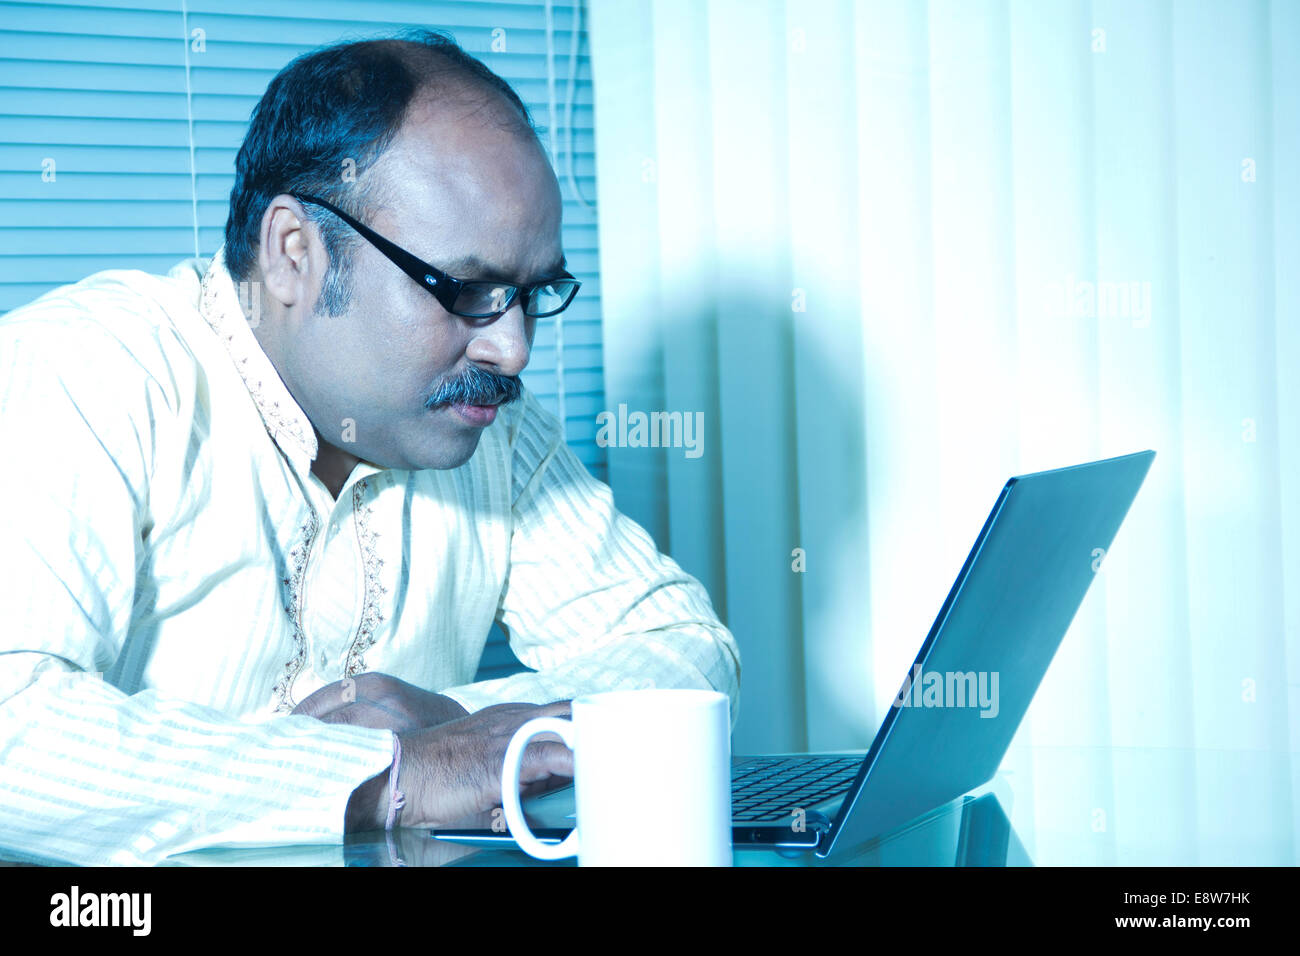 1 Indian man Working in Office Stock Photo